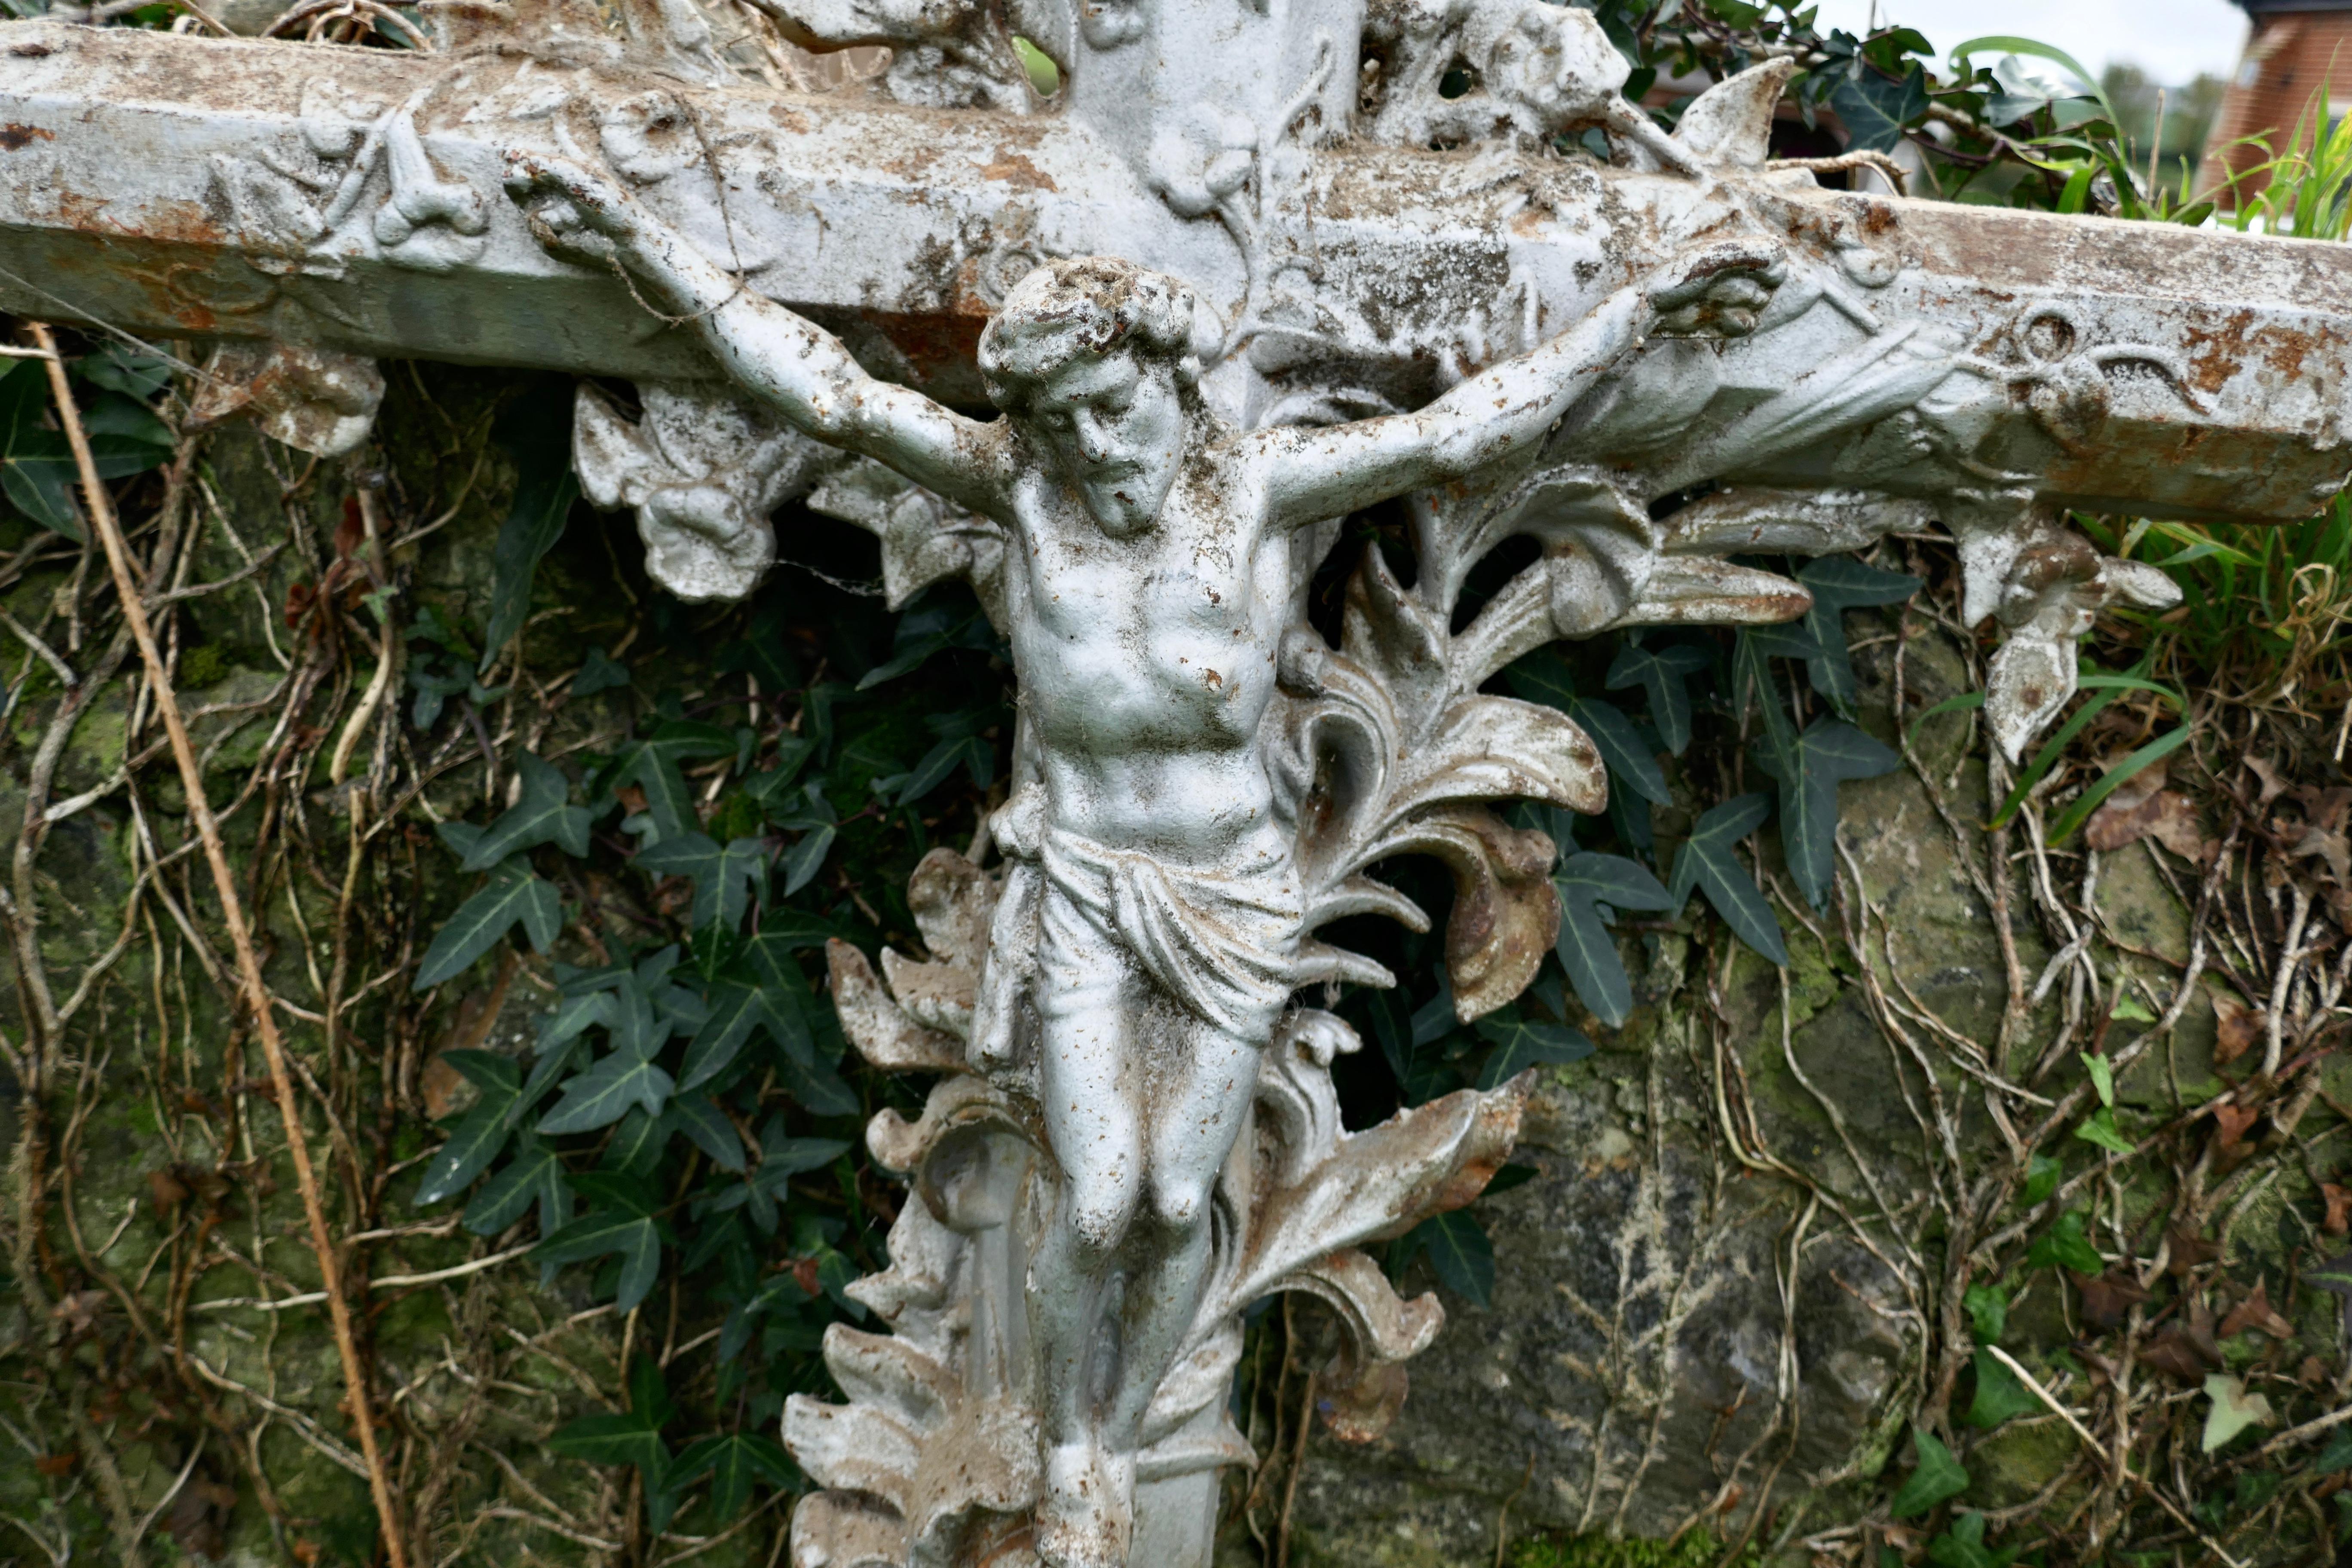 A large architectural French cast iron cross,

This magnificent antique cast iron cross from the church yard of a derelict country church in France. 
The cross would have been cast over 150 years ago and decorated with briars and thorns 
The